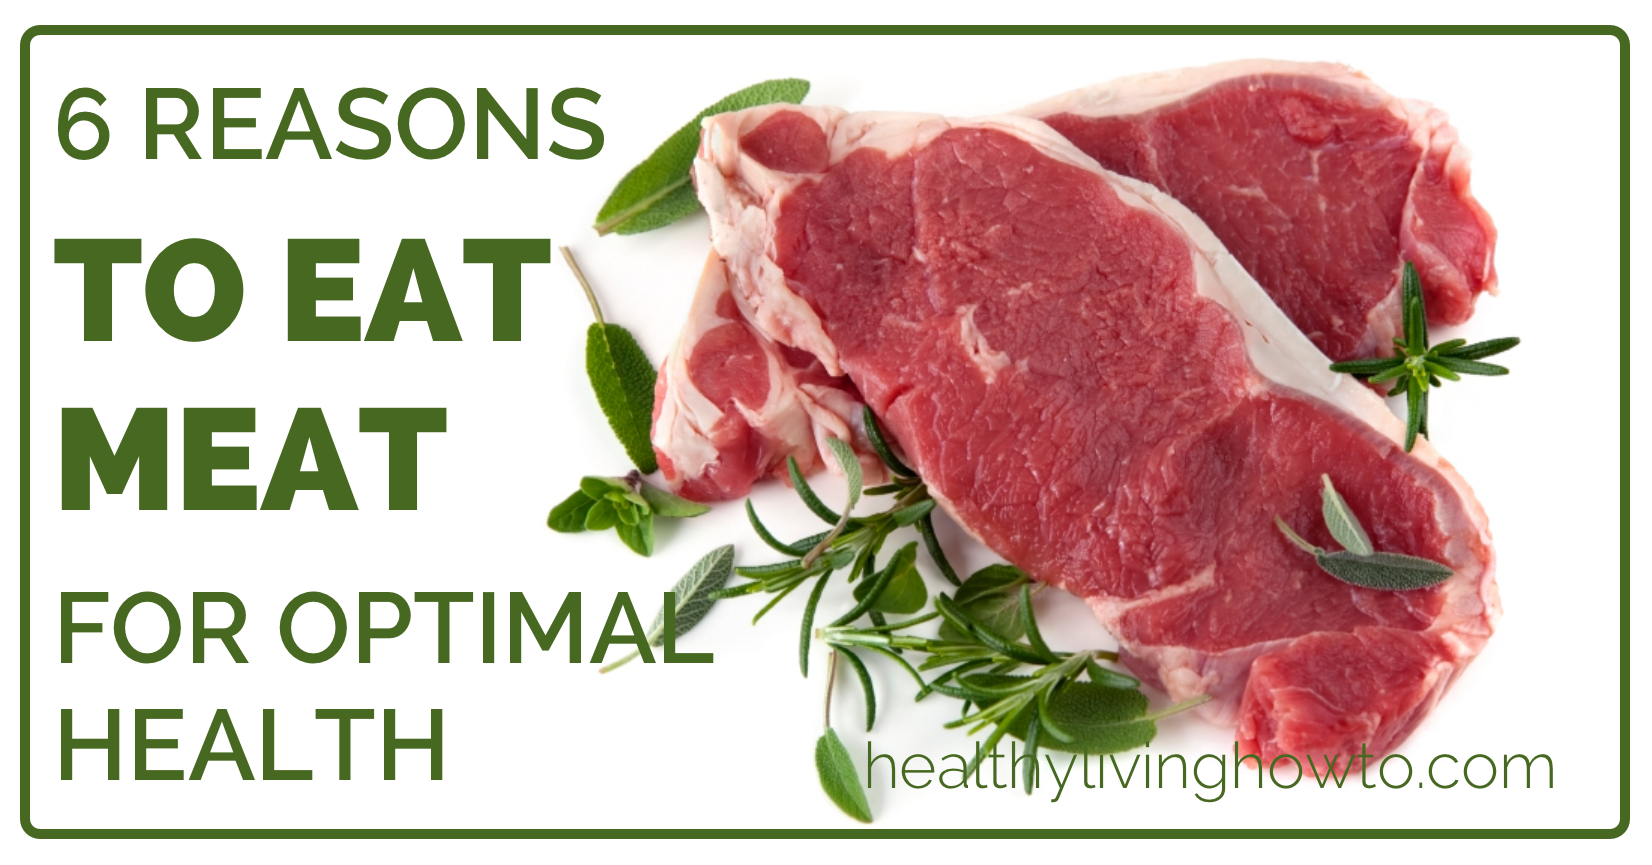 6 Reasons To Eat Meat For Optimal Health | healthylivinghowto.com